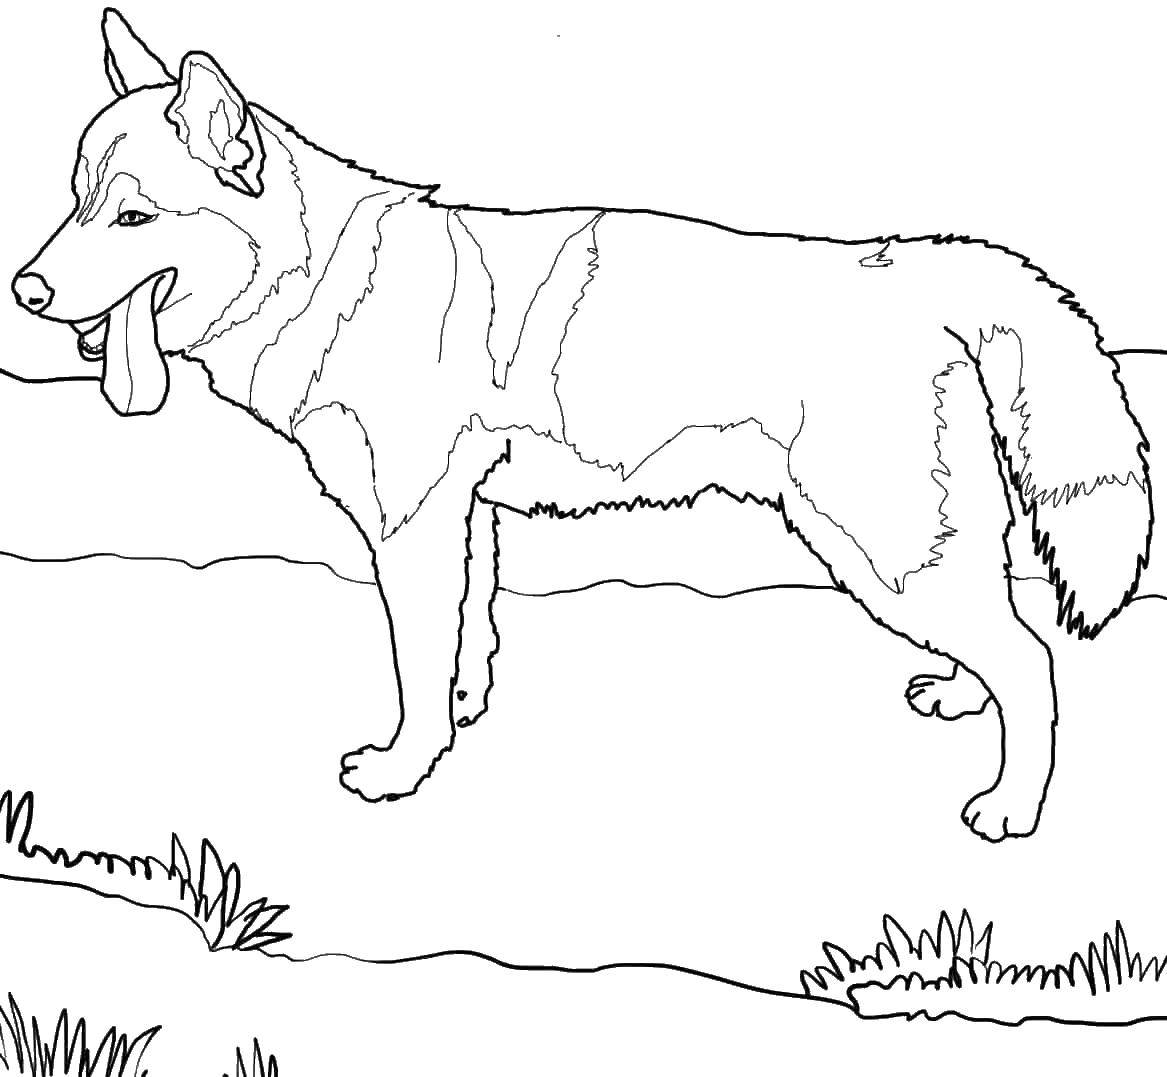 Coloring Wolf. Category animals. Tags:  wolf.